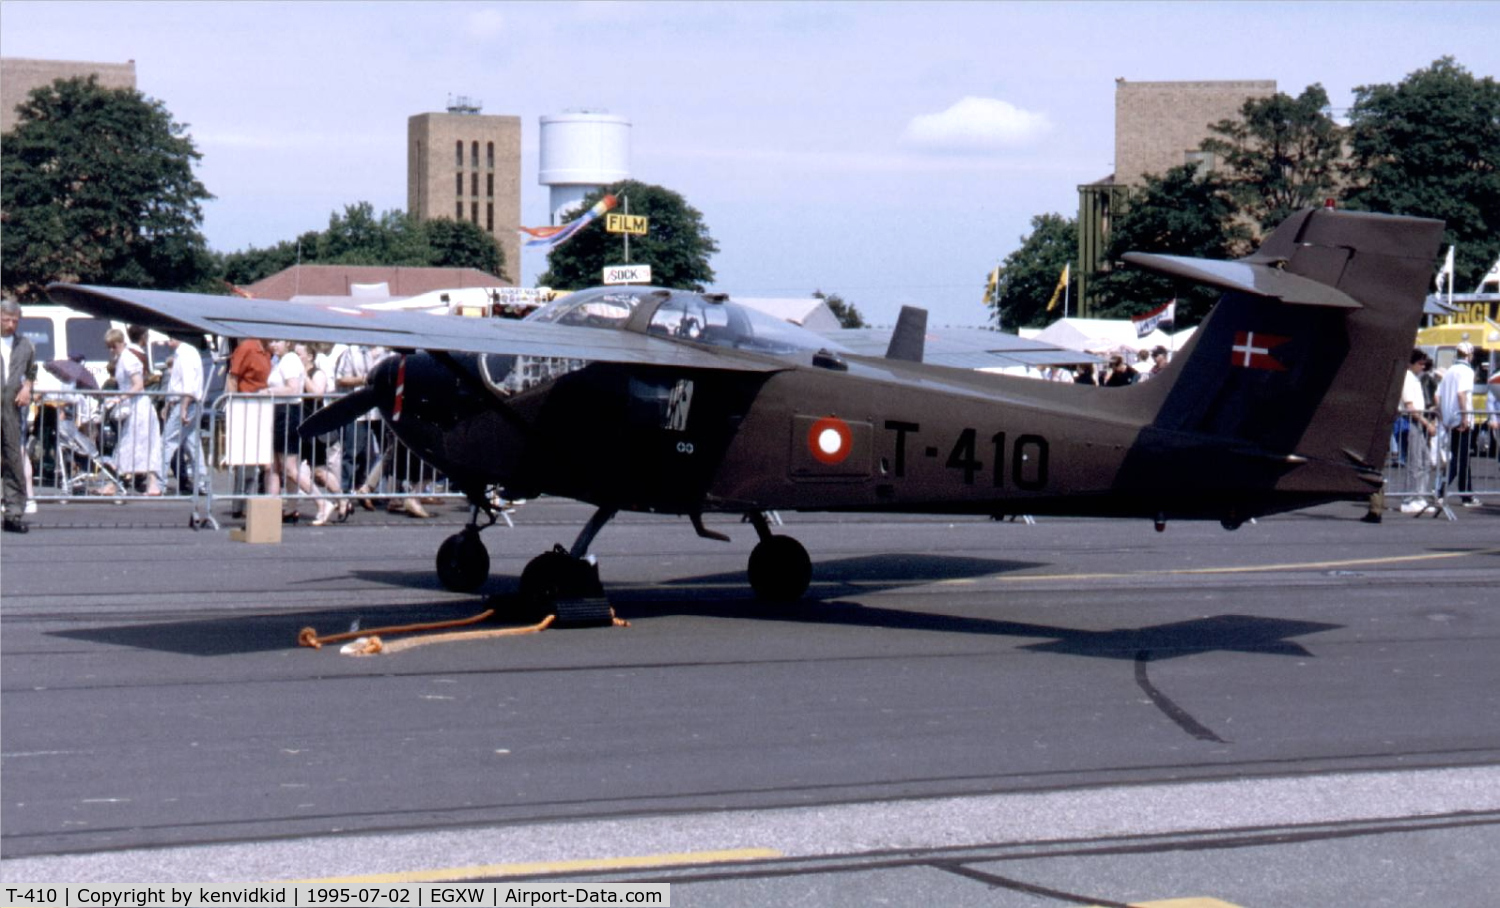 T-410, Saab T-17 Supporter C/N 15-210, Airshow 1995